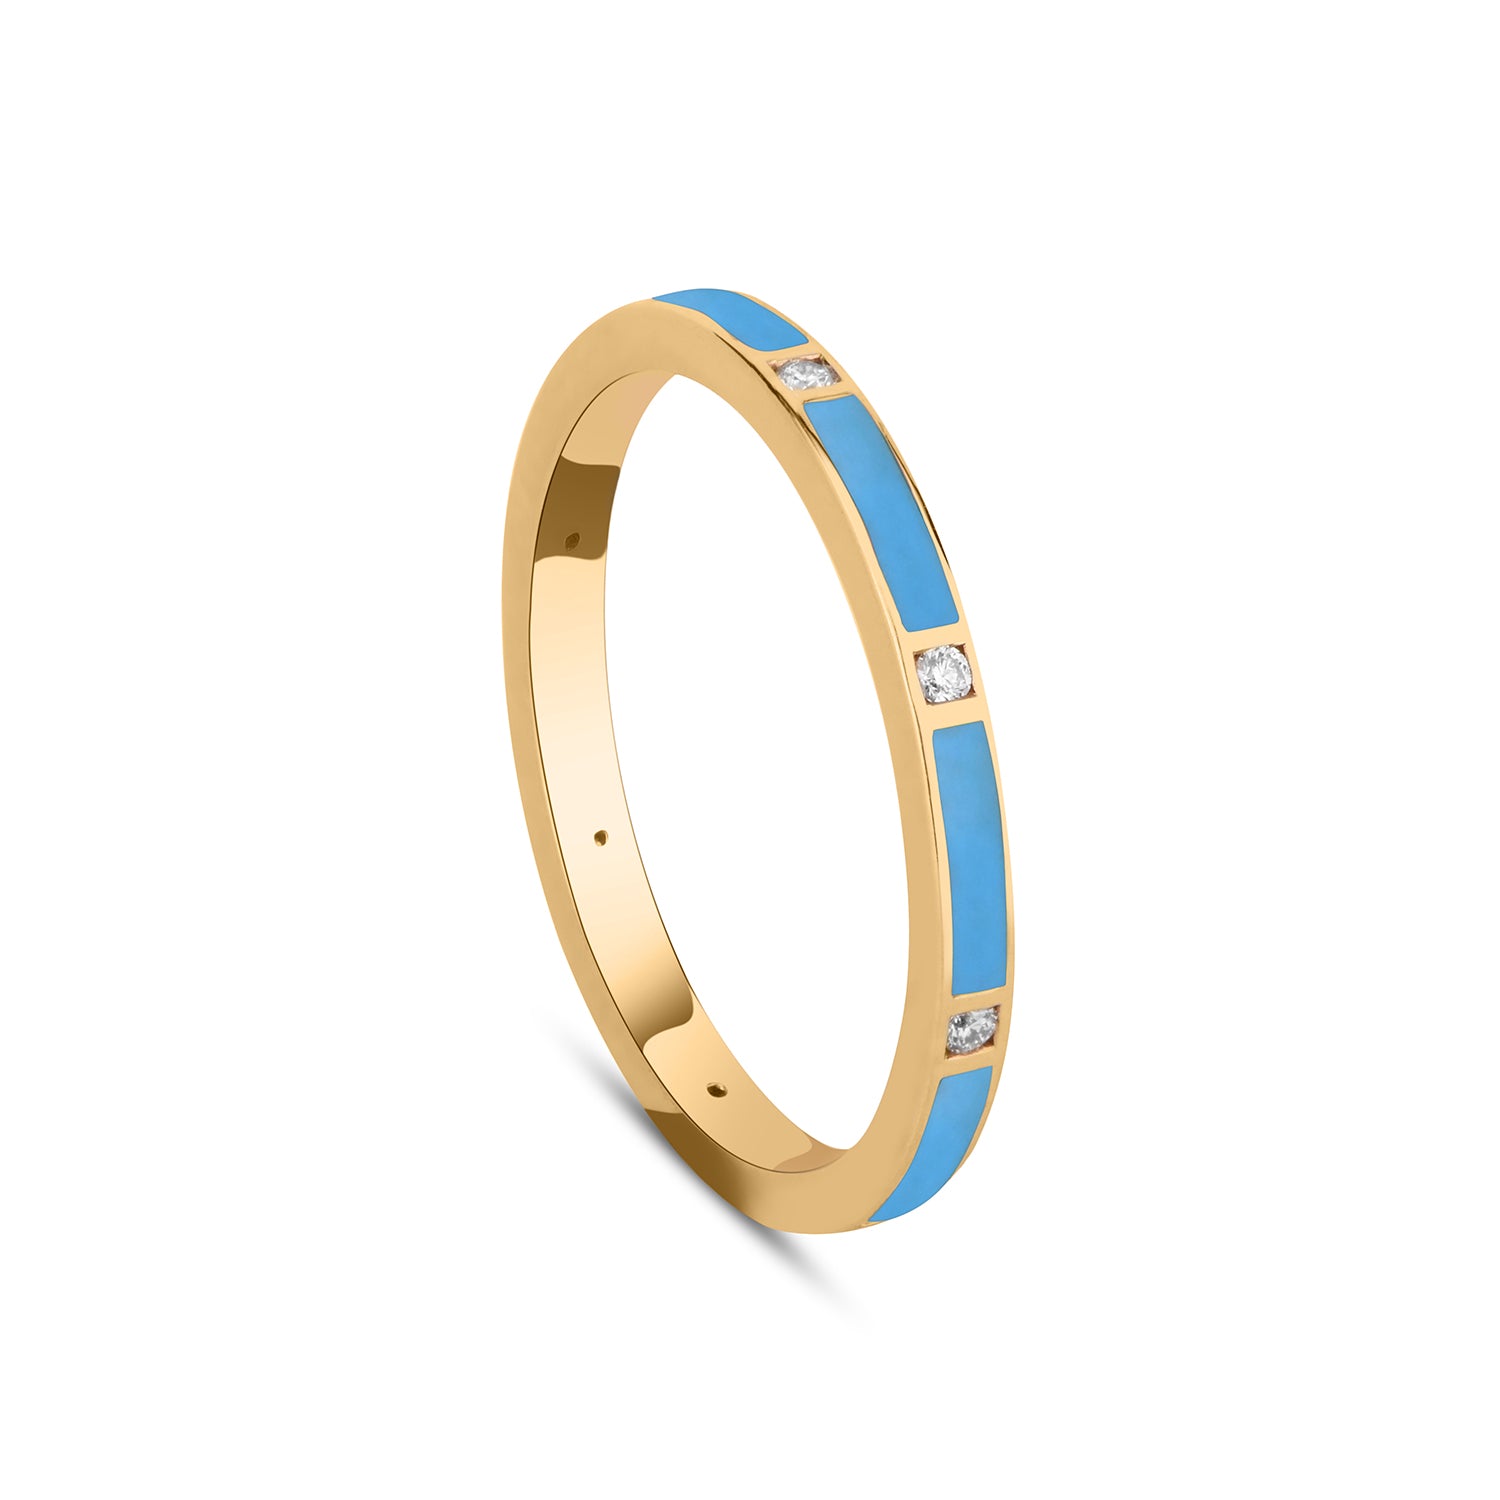 Kate Spade Universal Stability Ring Gold/Cream Enamel : Amazon.ca:  Clothing, Shoes & Accessories